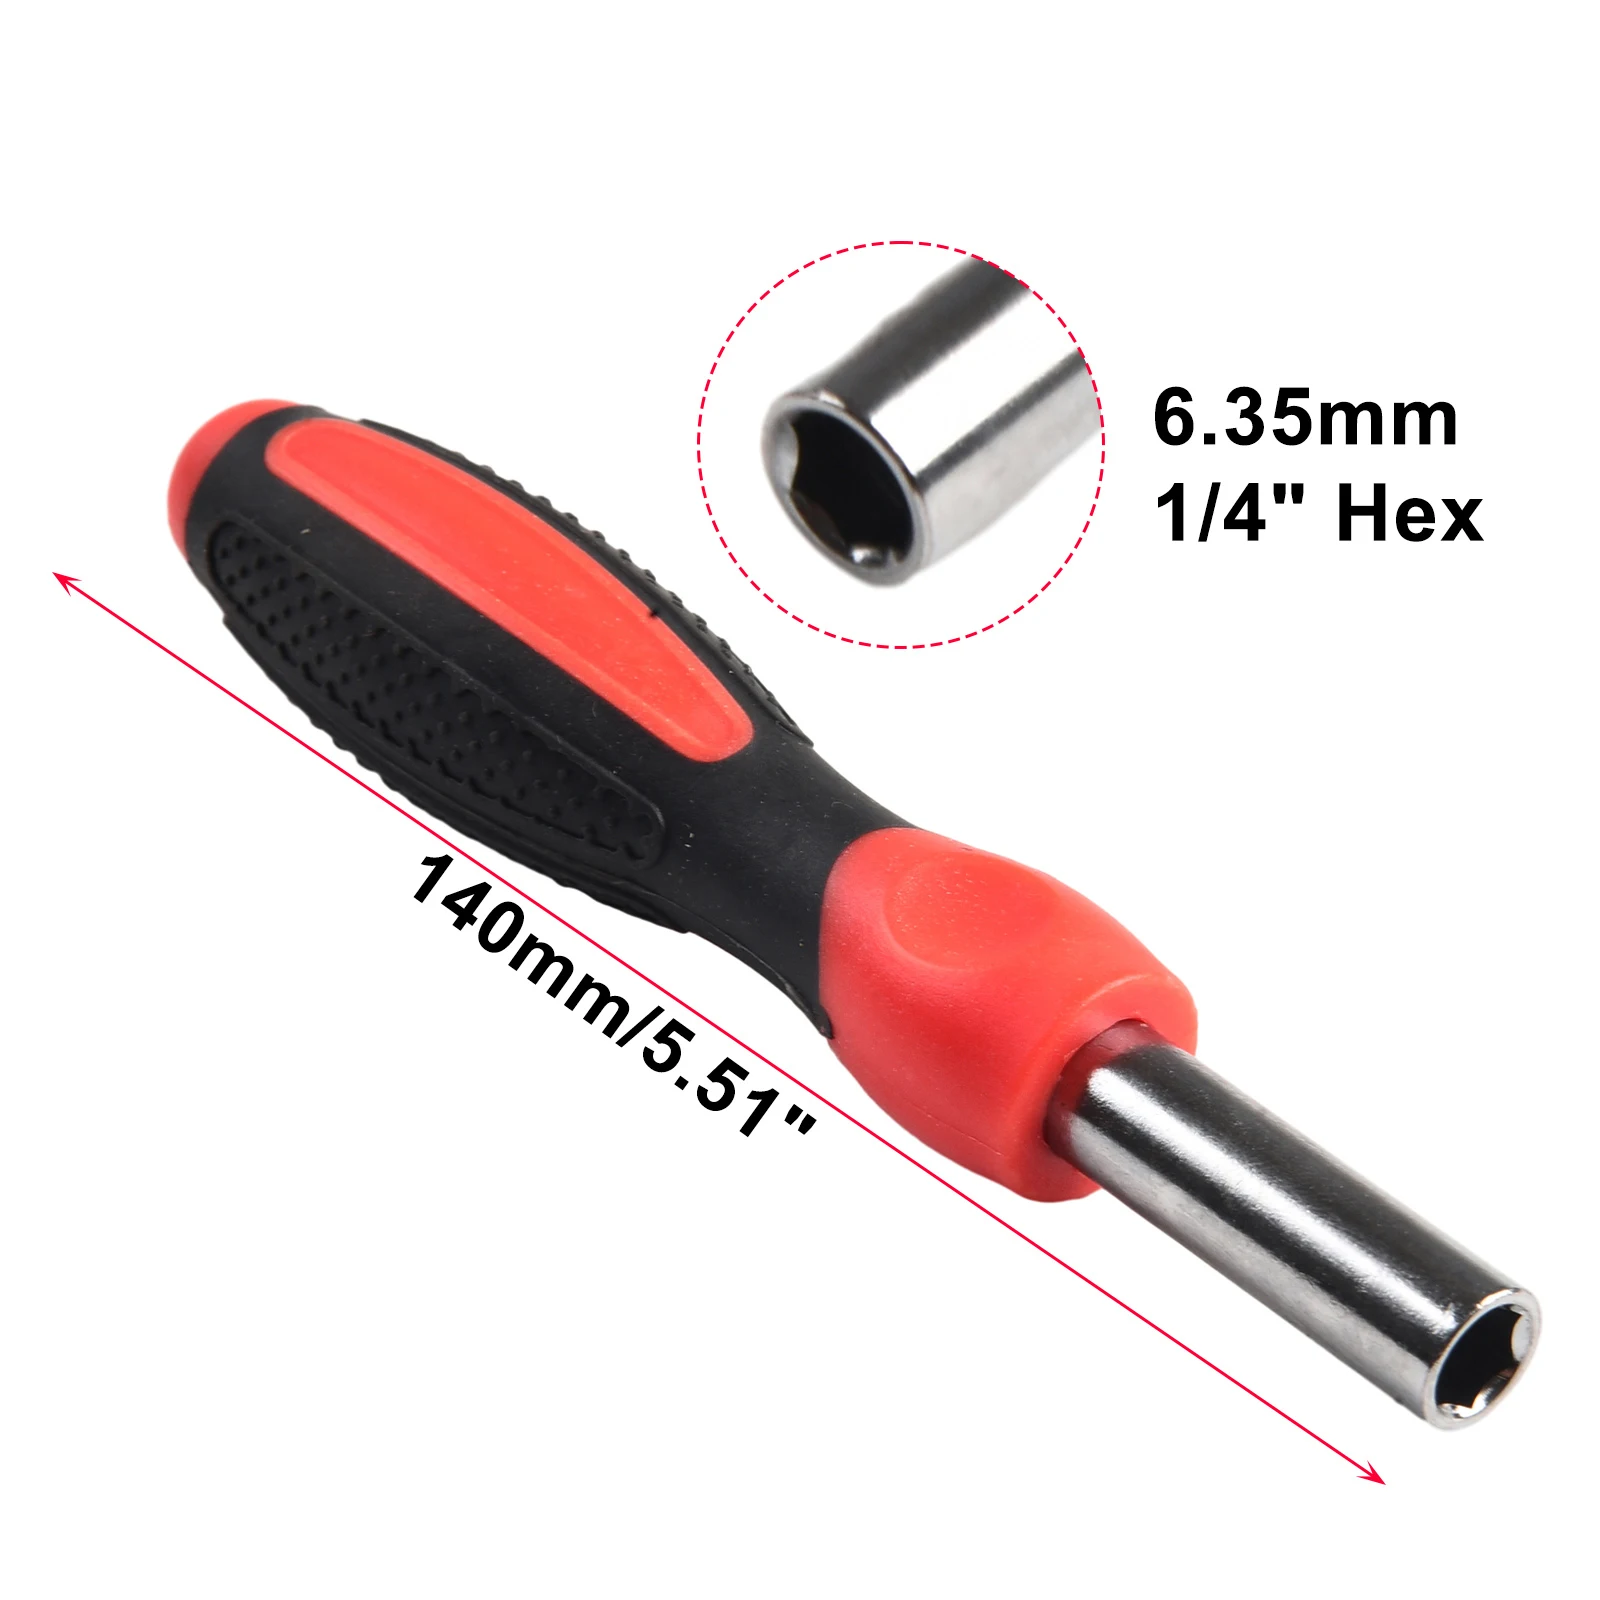 

6.35mm Hex Adapter Screwdriver Handle Magnetic Head Screwdriver Bit Holder For Socket Wrench 1/4 " Adapter Connection